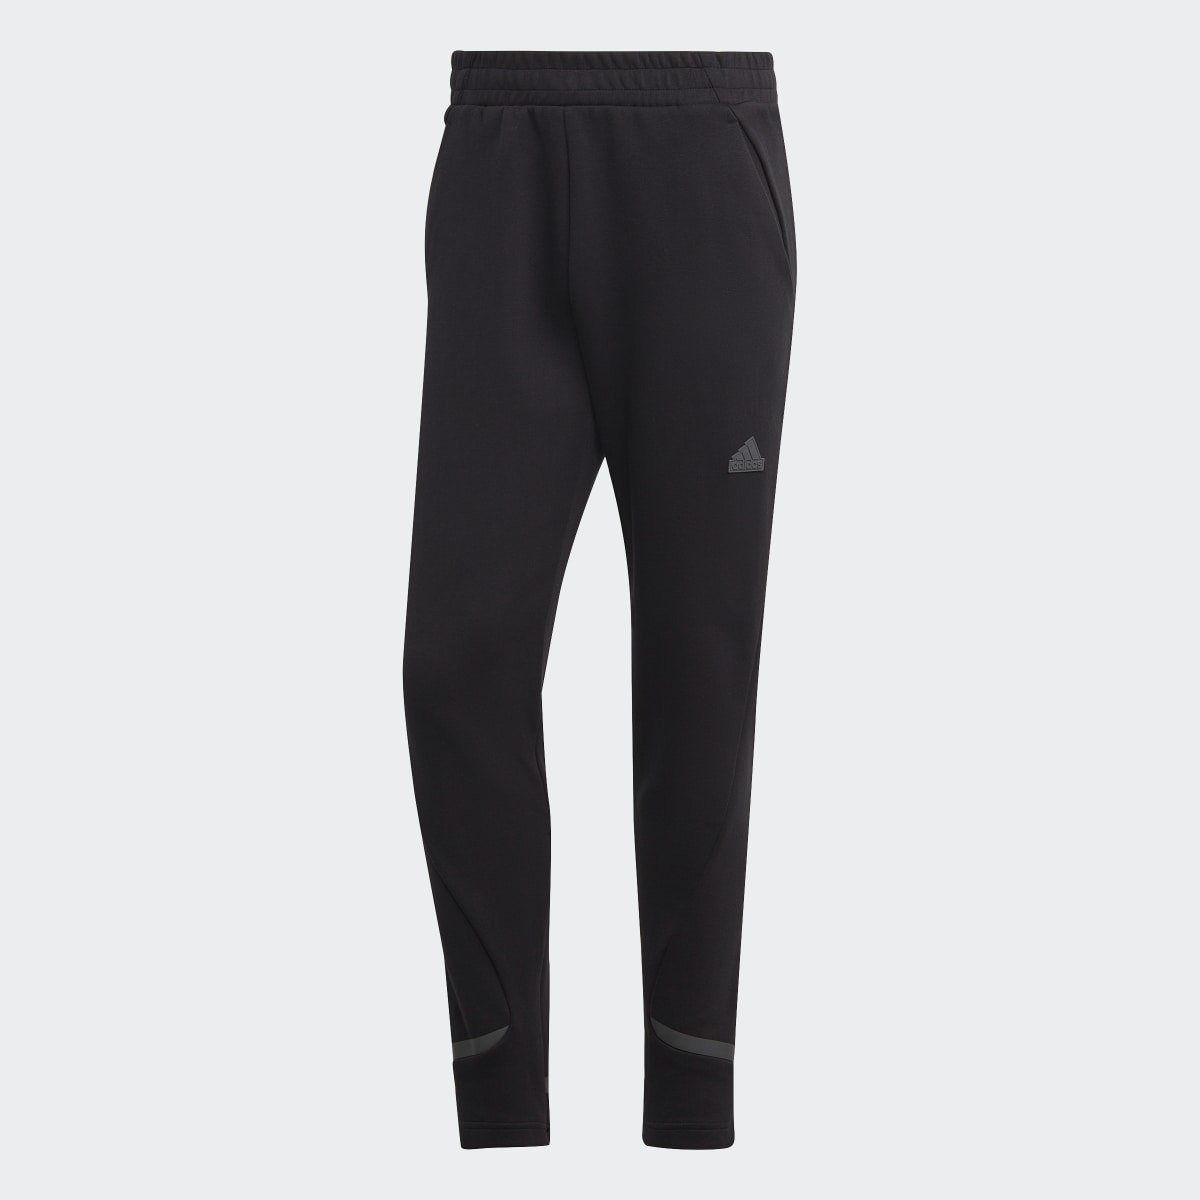 Adidas Designed for Gameday Tracksuit Bottoms. 5